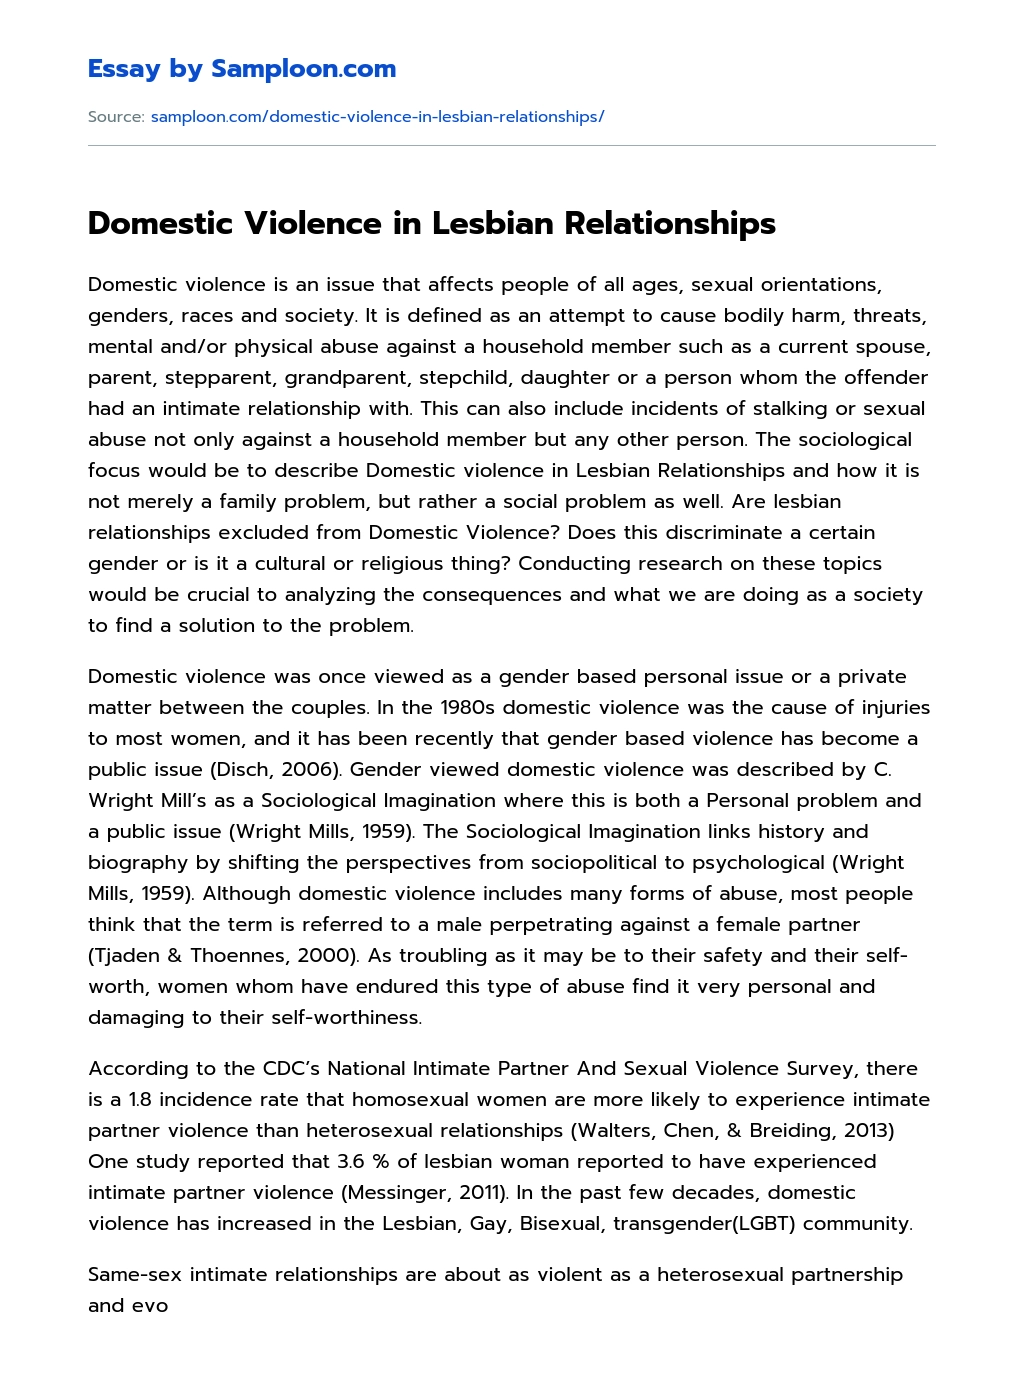 Domestic Violence in Lesbian Relationships essay